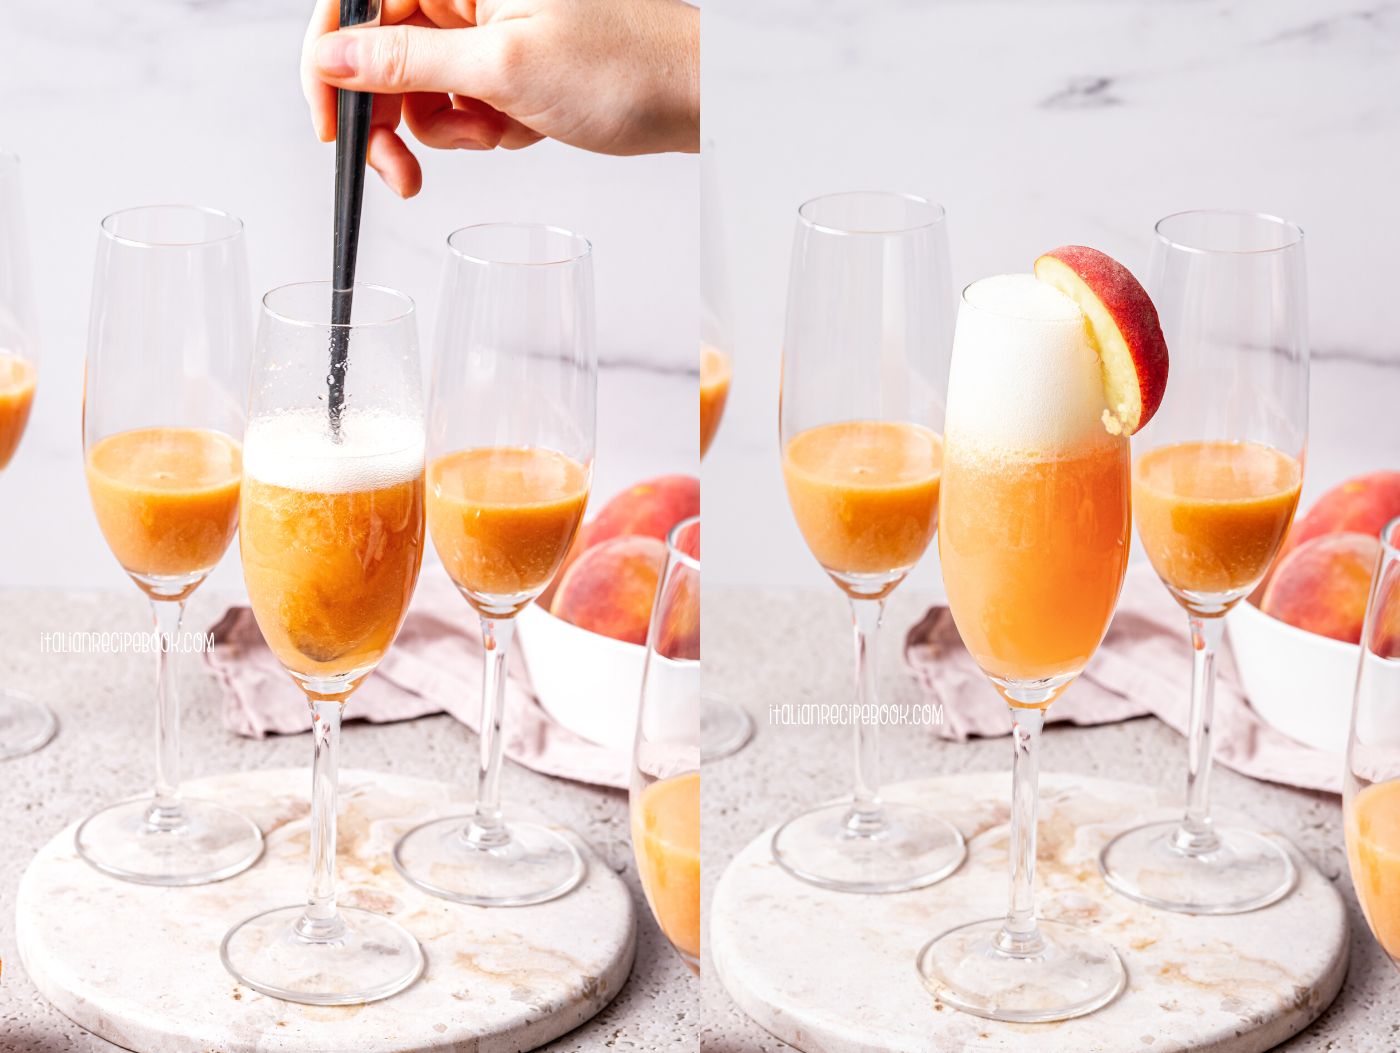 how to make bellini cocktail - stir bellini cocktail and serve